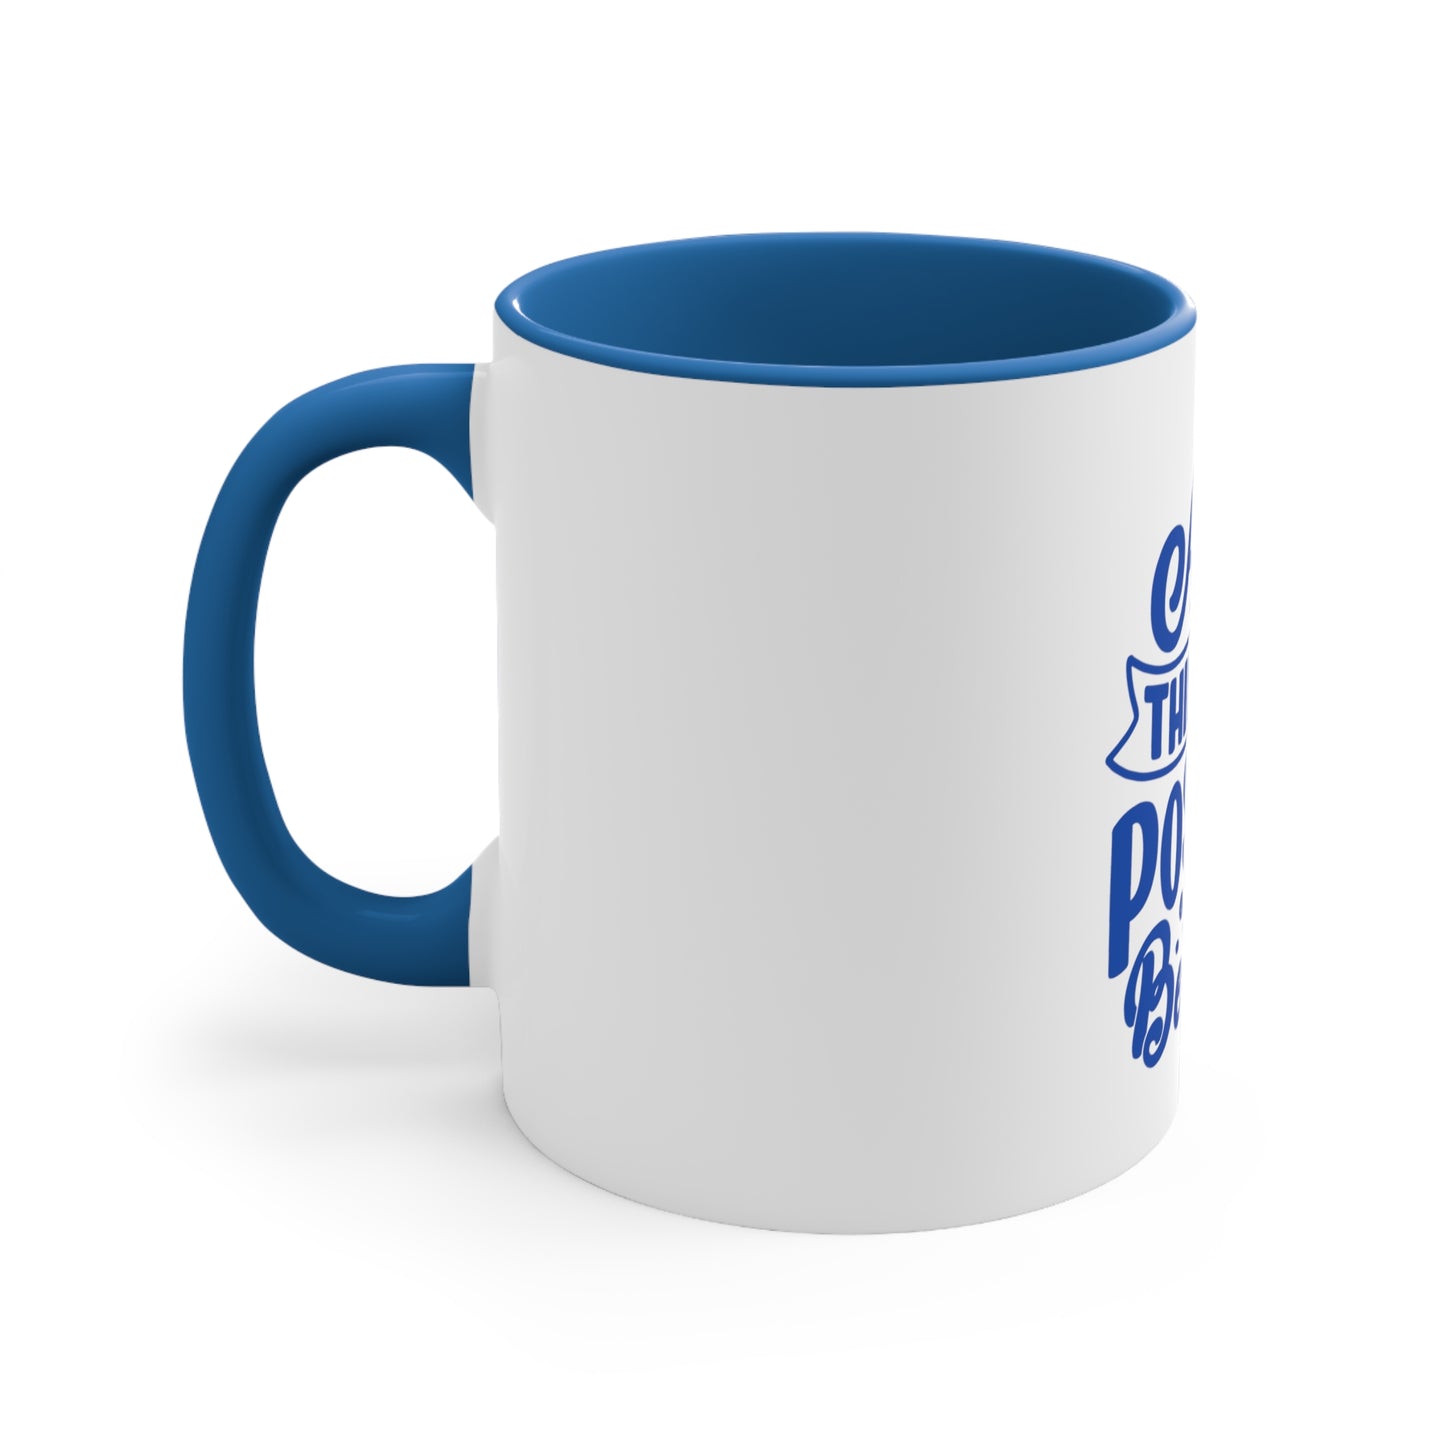 OOI-Blue and White Floral Print Mug"All Things Are Poossible..."